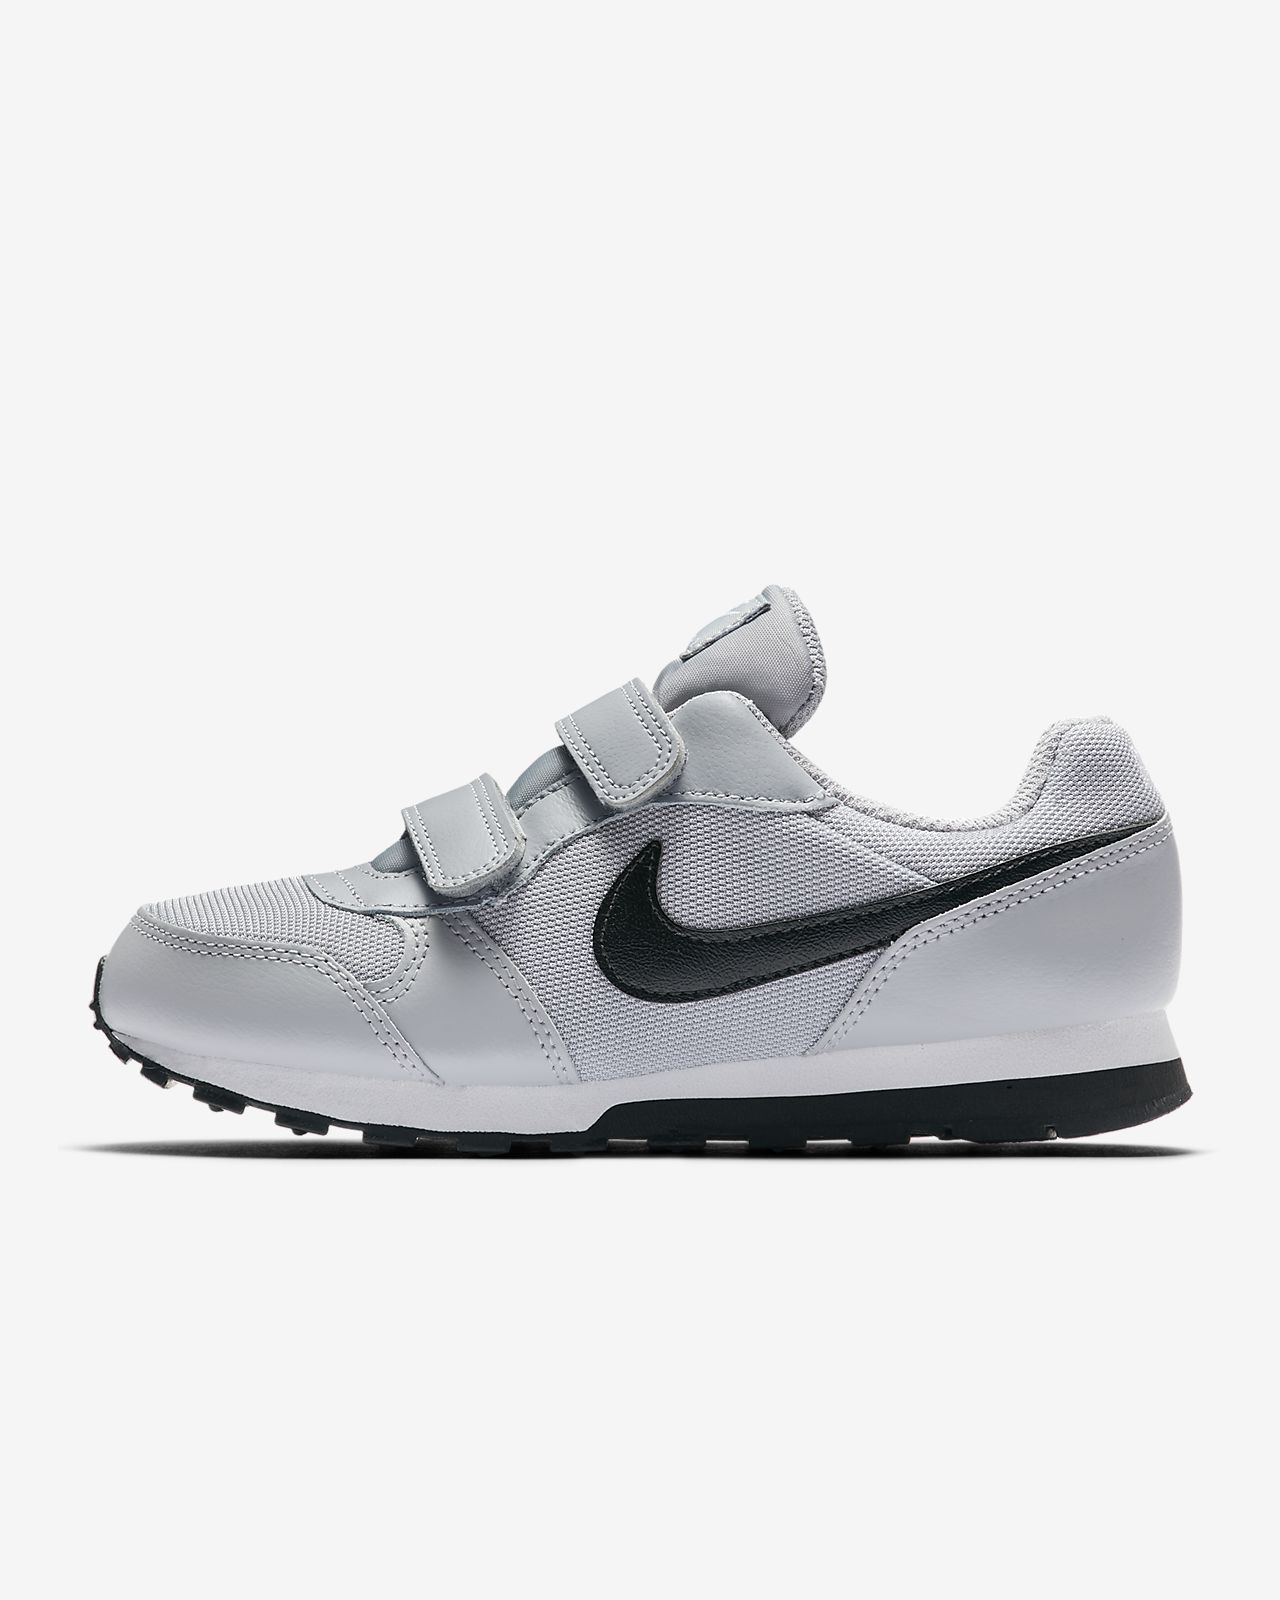 MD Runner 2 Younger Kids' Shoe. Nike IL